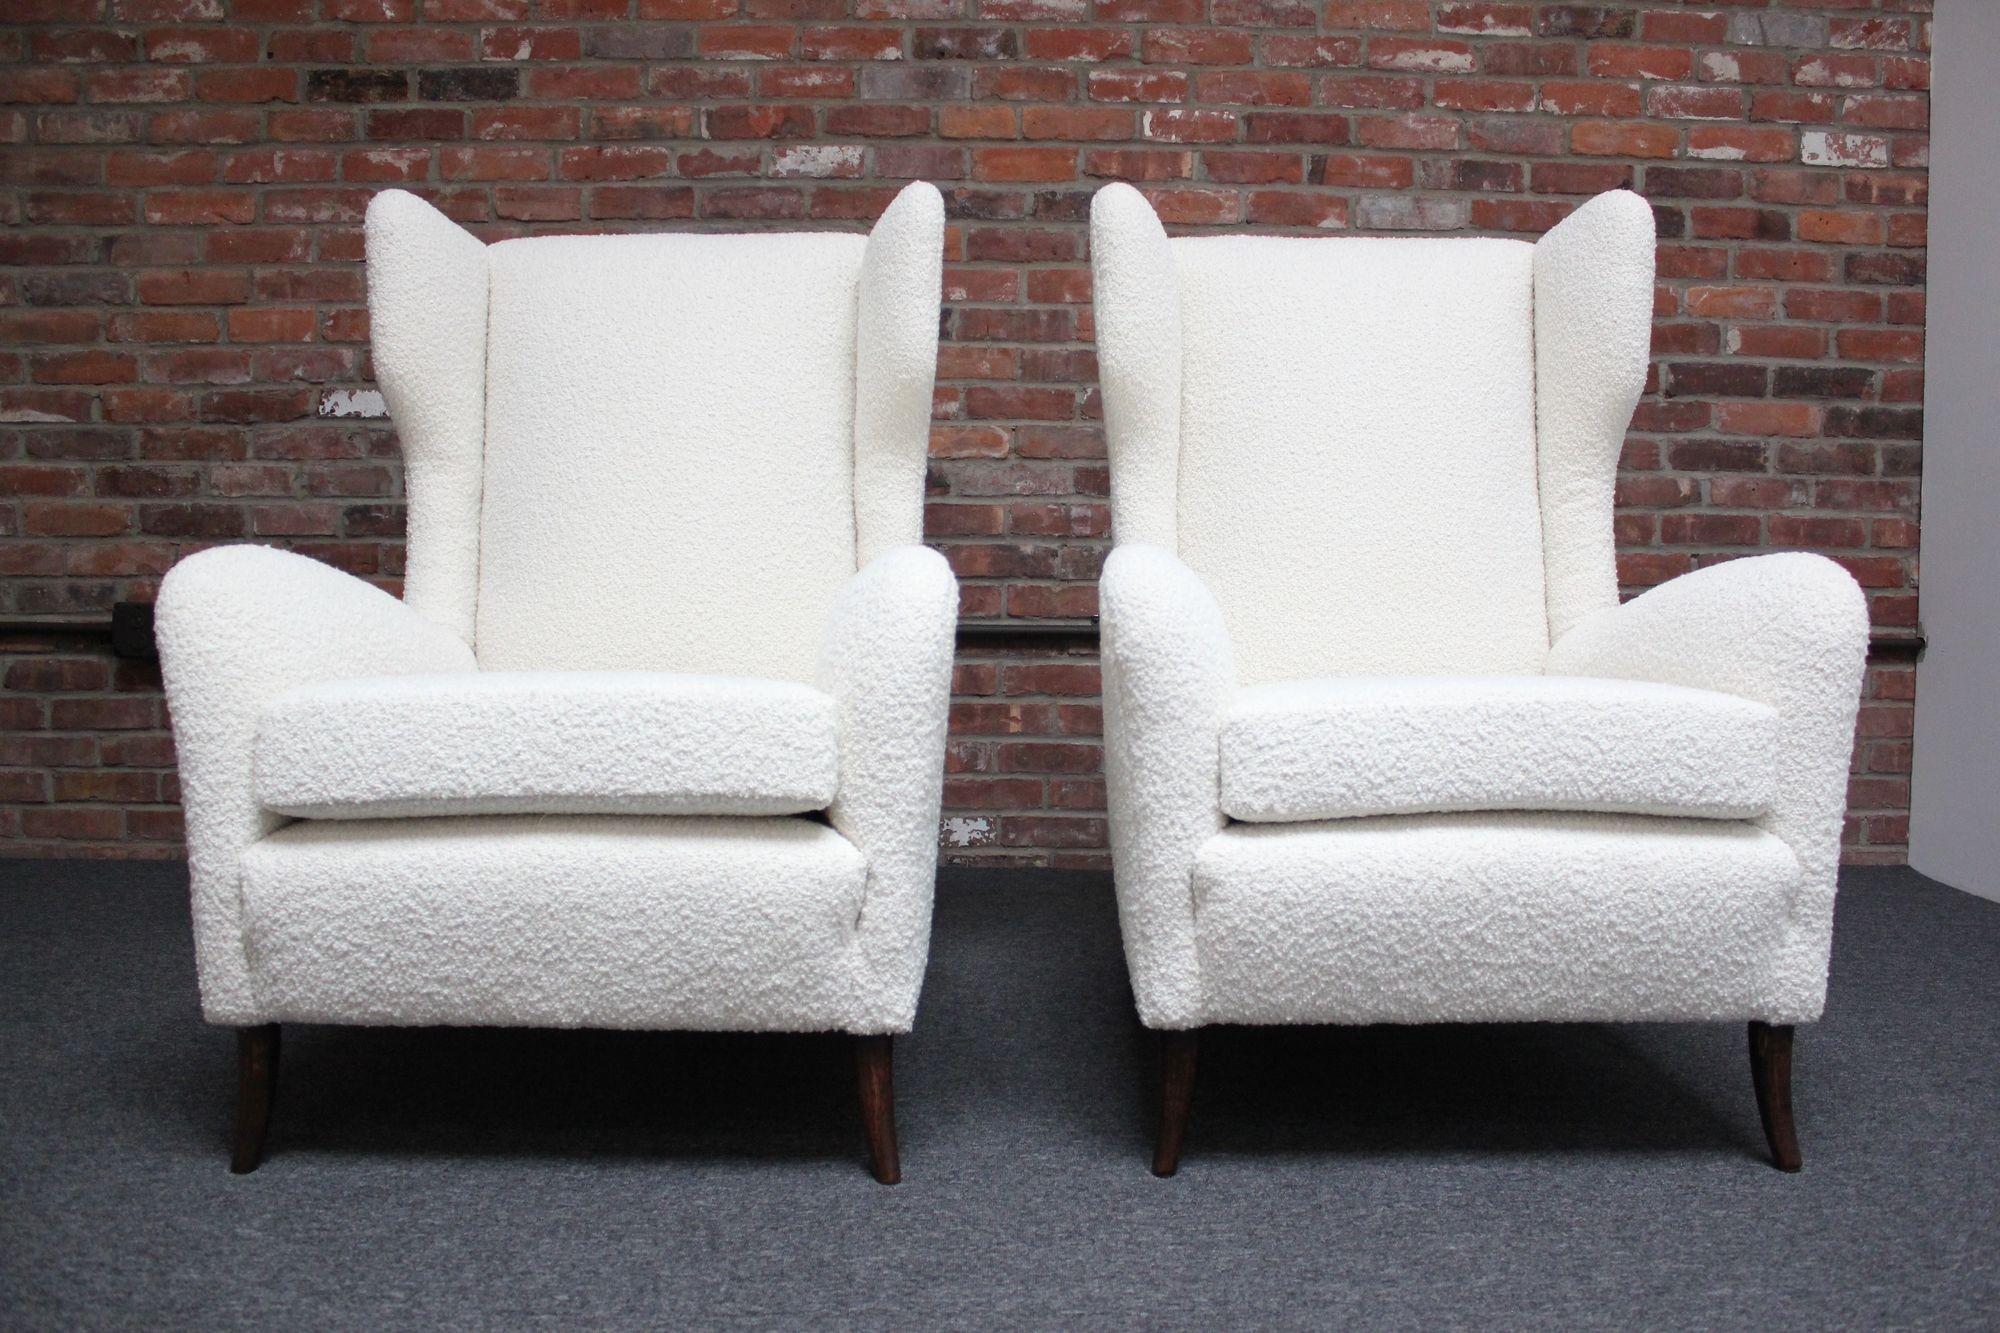 Modernist wingback chairs supported by sculptural, walnut feet (circa 1950s, Italy).
Stylish design, without compromising function and comfort.
Luxurious pair newly reupholstered in a cream Kravet bouclé 36120-1). The foam has additionally been